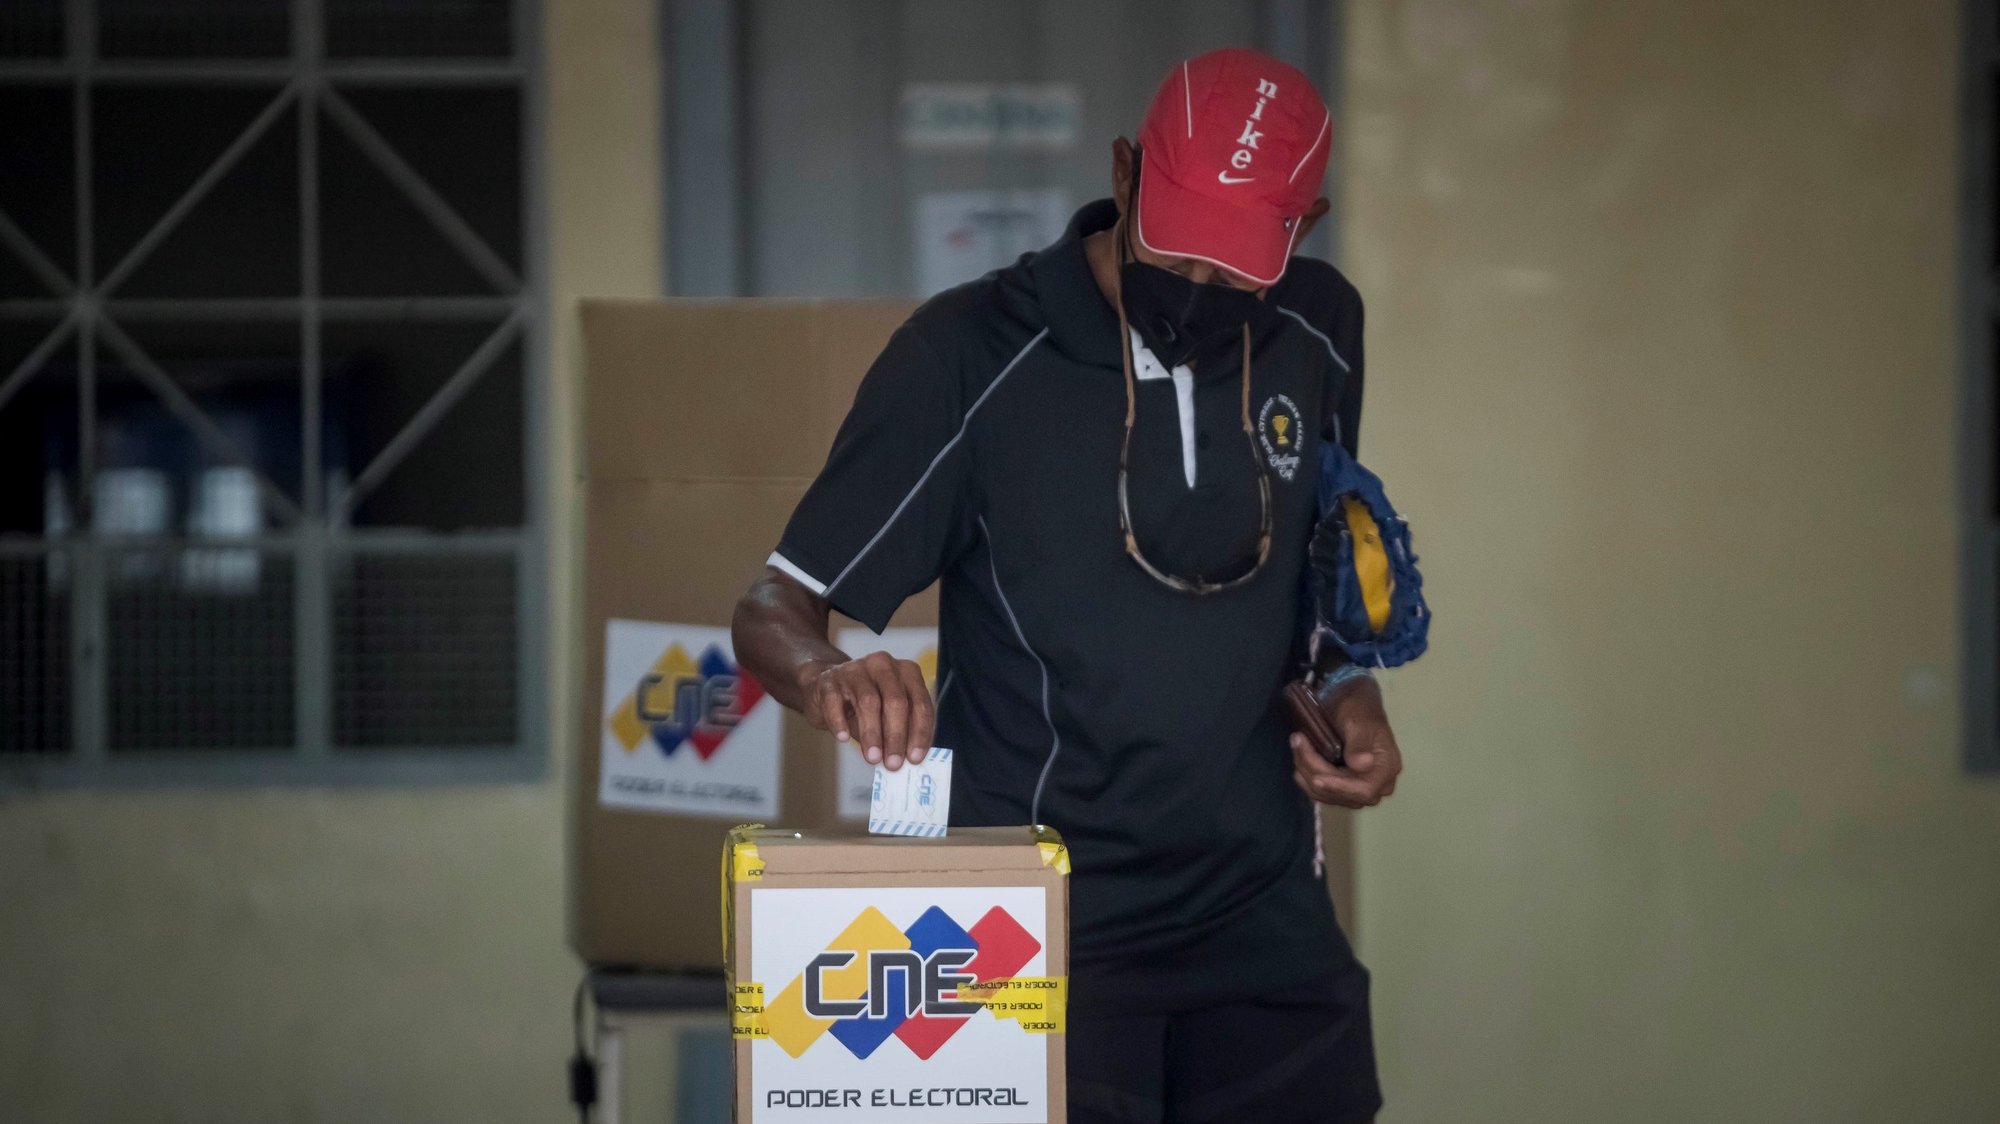 epa08867315 A voter casts his vote in a ballot box in a polling station during Parliamentary elections, in Caracas, Venezuela, 06 December 2020. Venezuelans were called to polls to select 277 members of the National Assembly. The opposition has called for a boycott of the elections, on grounds that the contest will not be free and fair.  EPA/Miguel Gutierrez